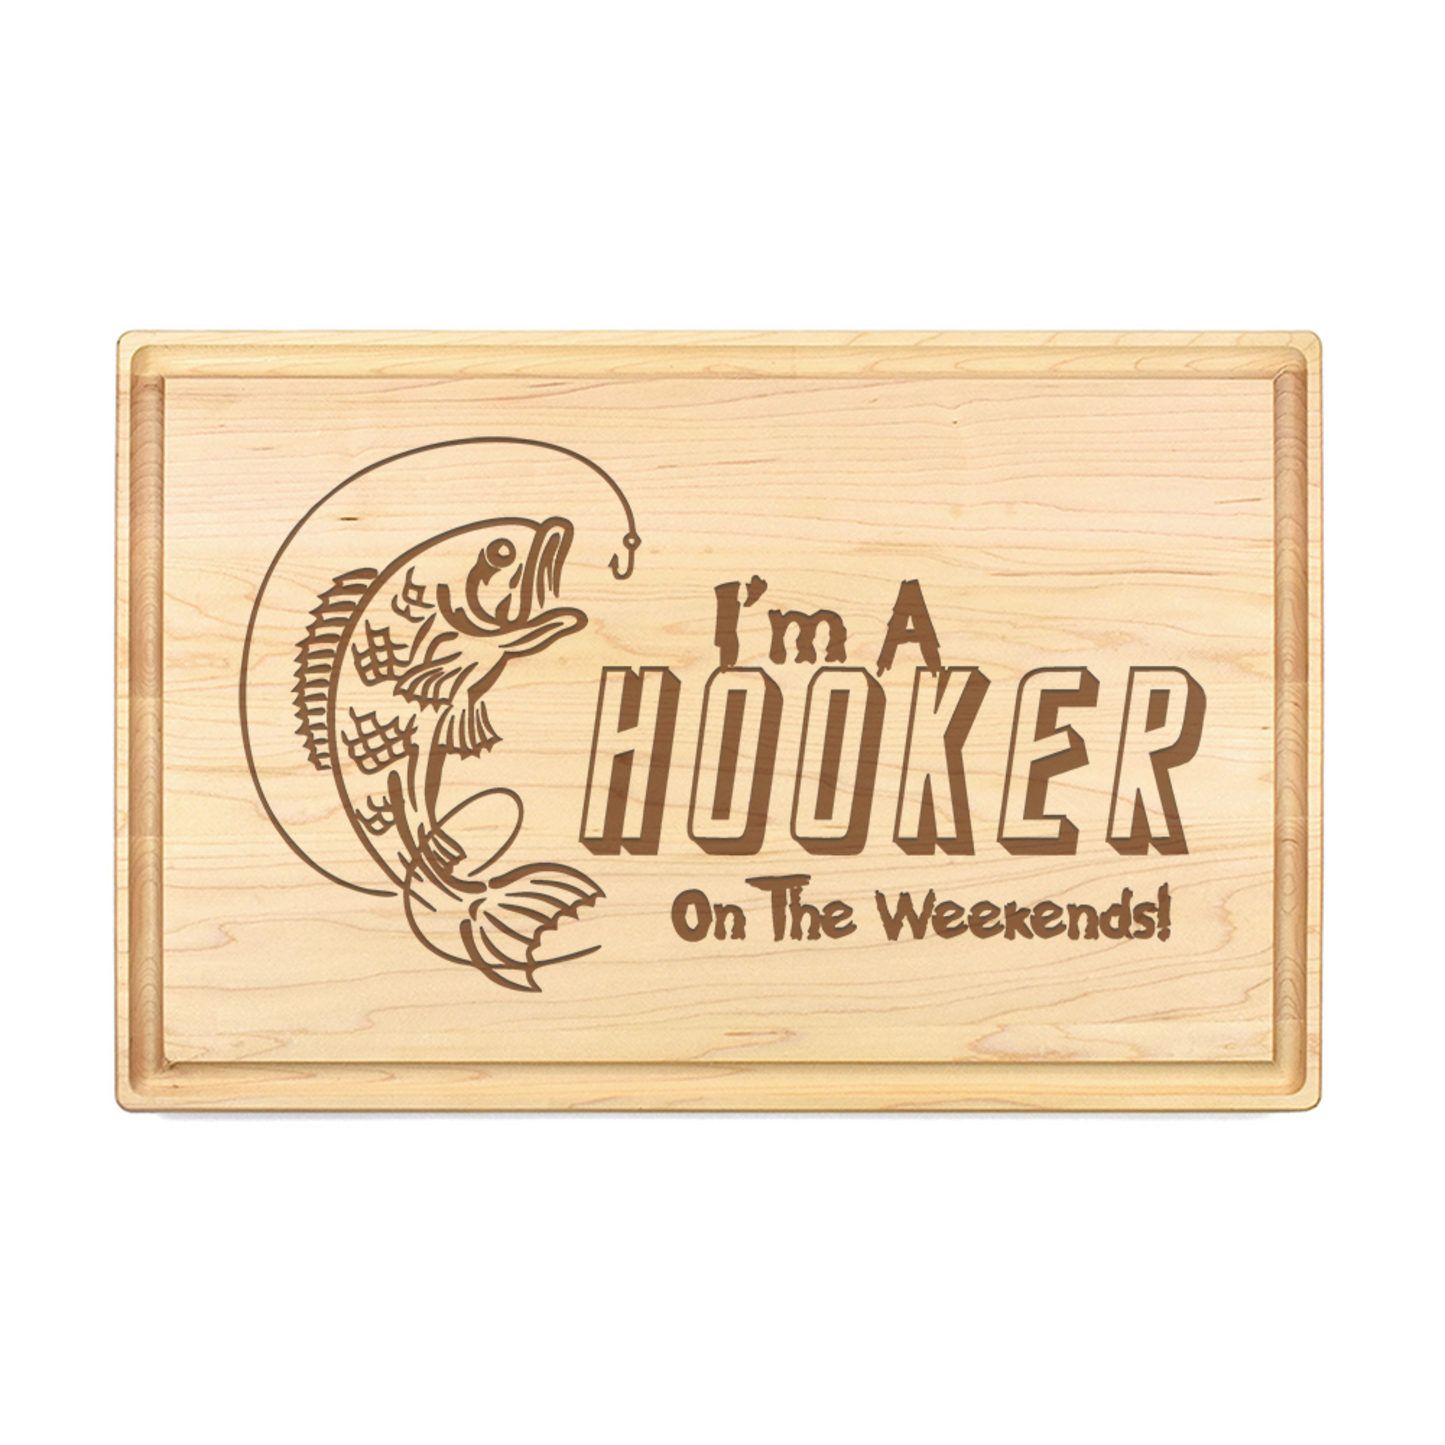 I'm A Hooker On The Weekend Cutting Board